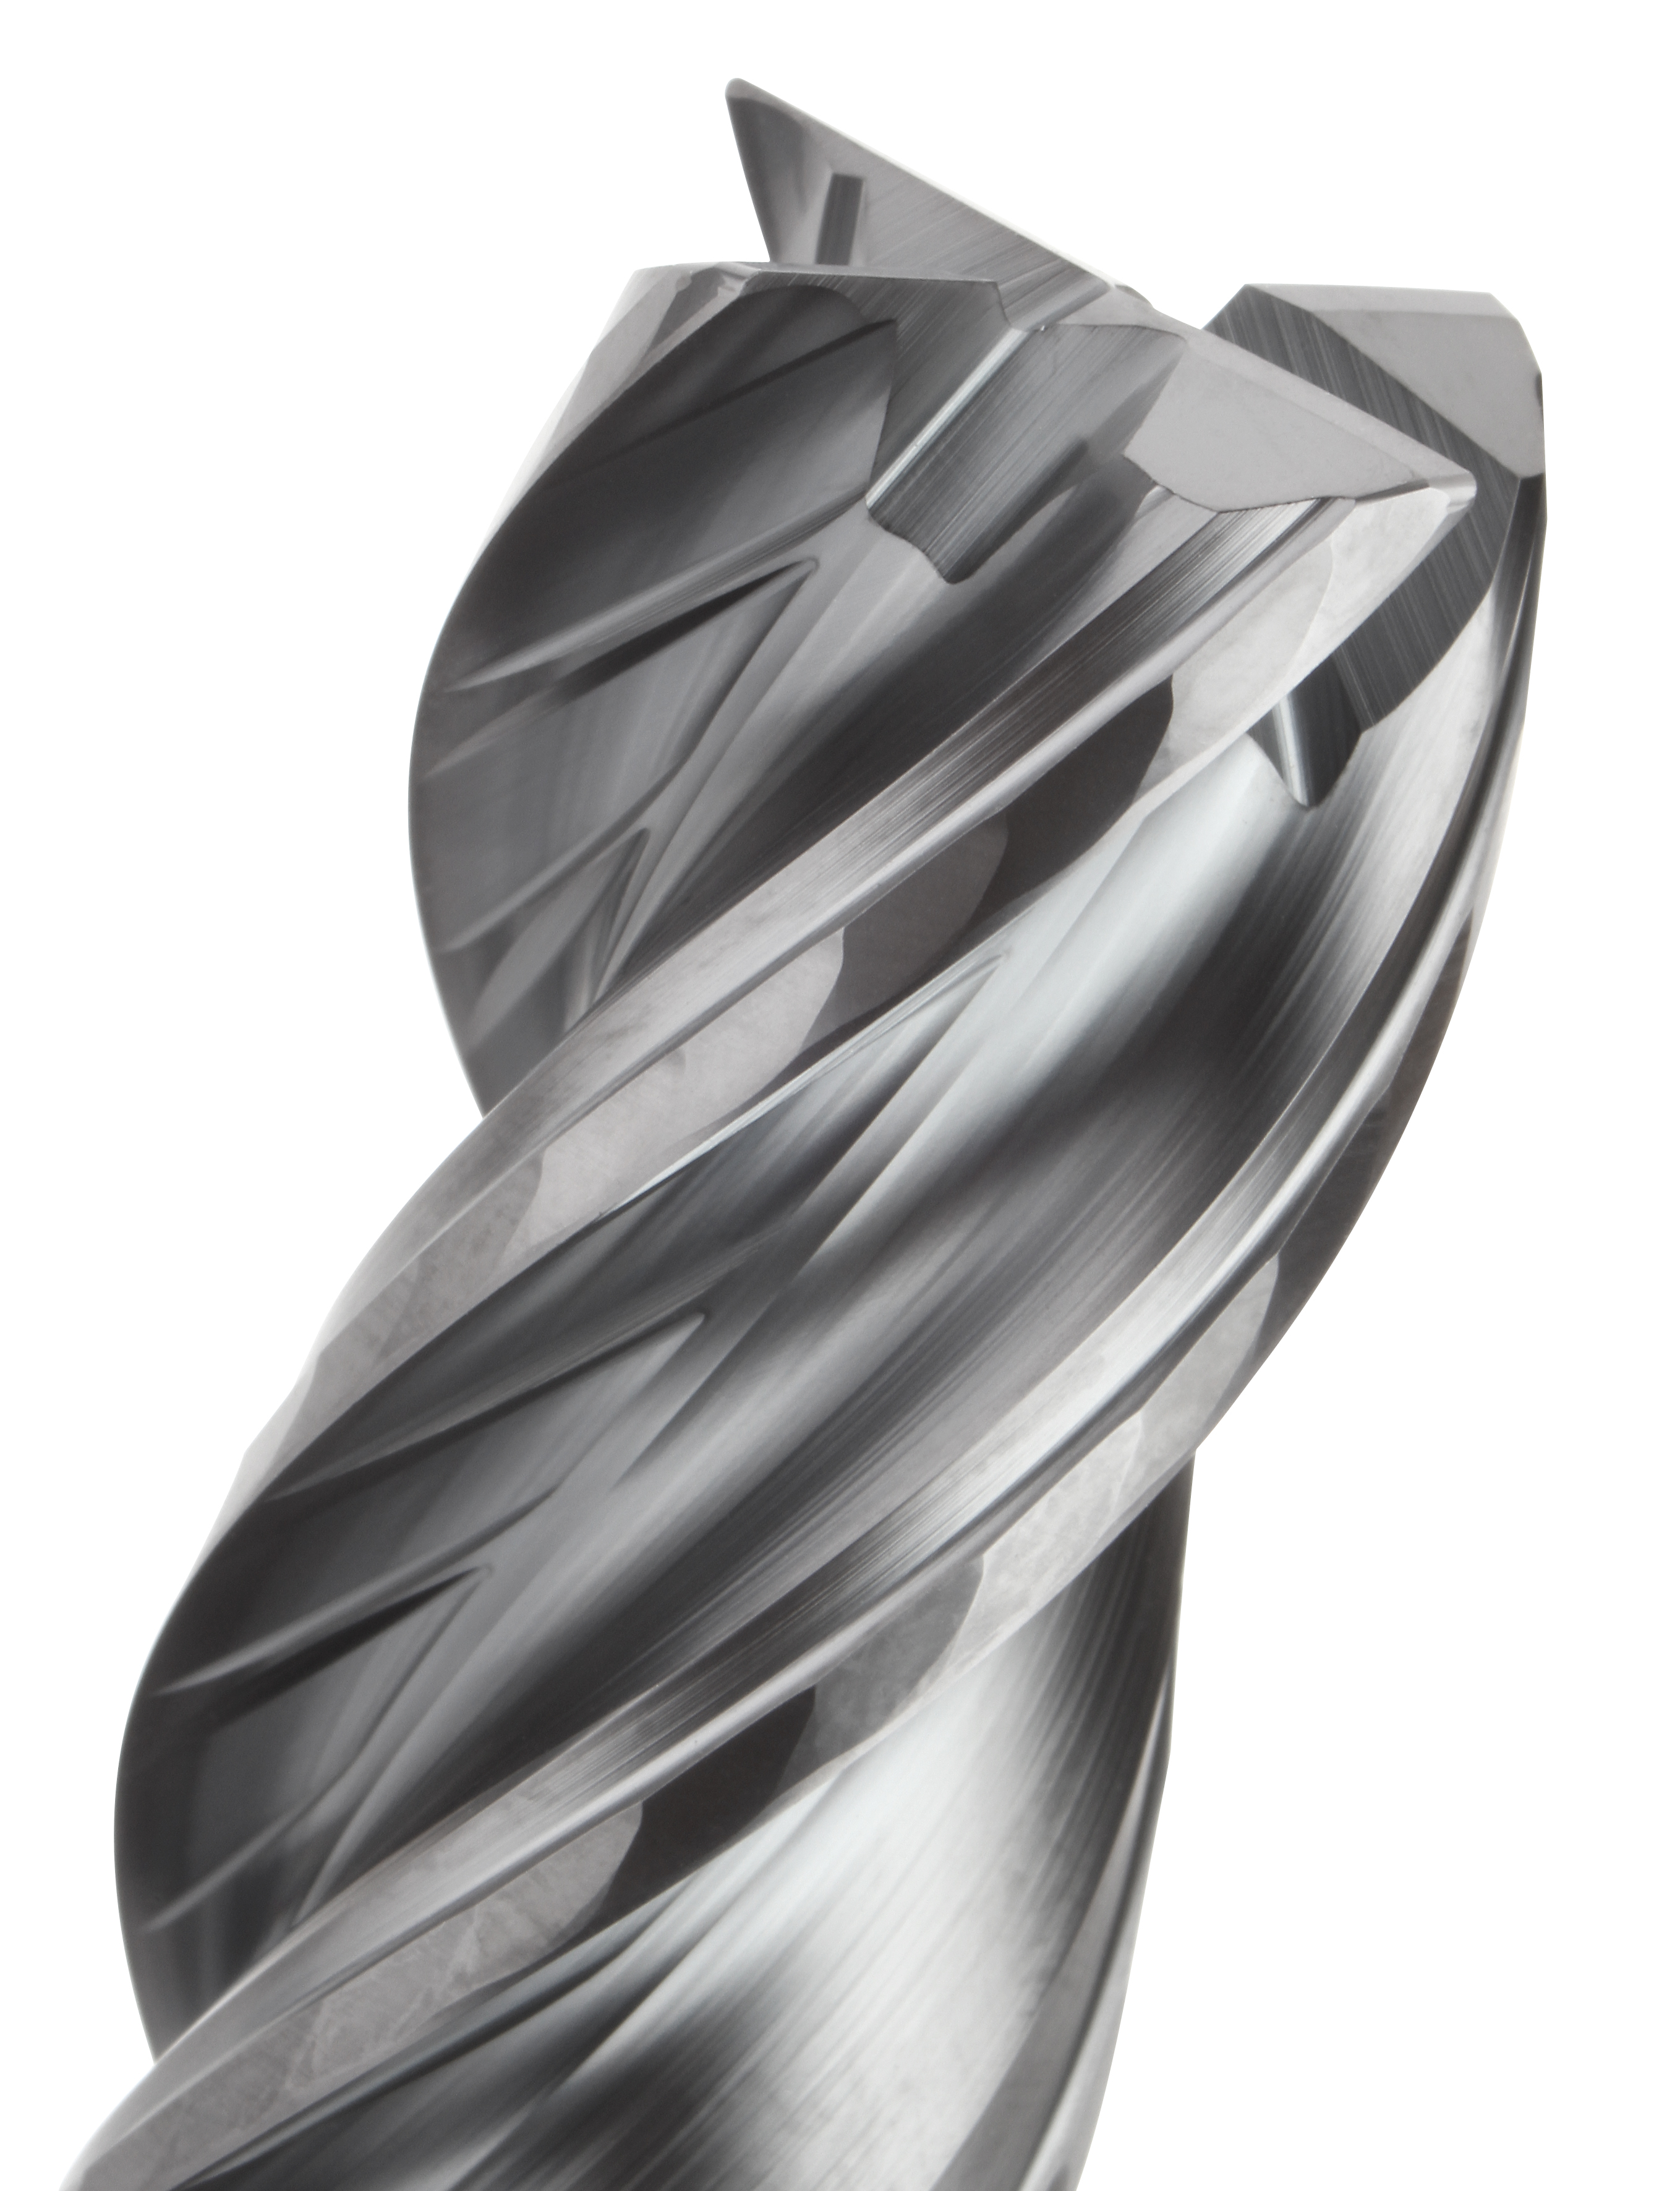 High performing yet extremely versatile, the HARVI I TE is a perfect end mill for job shops and others that machine multiple materials and perform diverse operations. (Image courtesy of Kennametal)